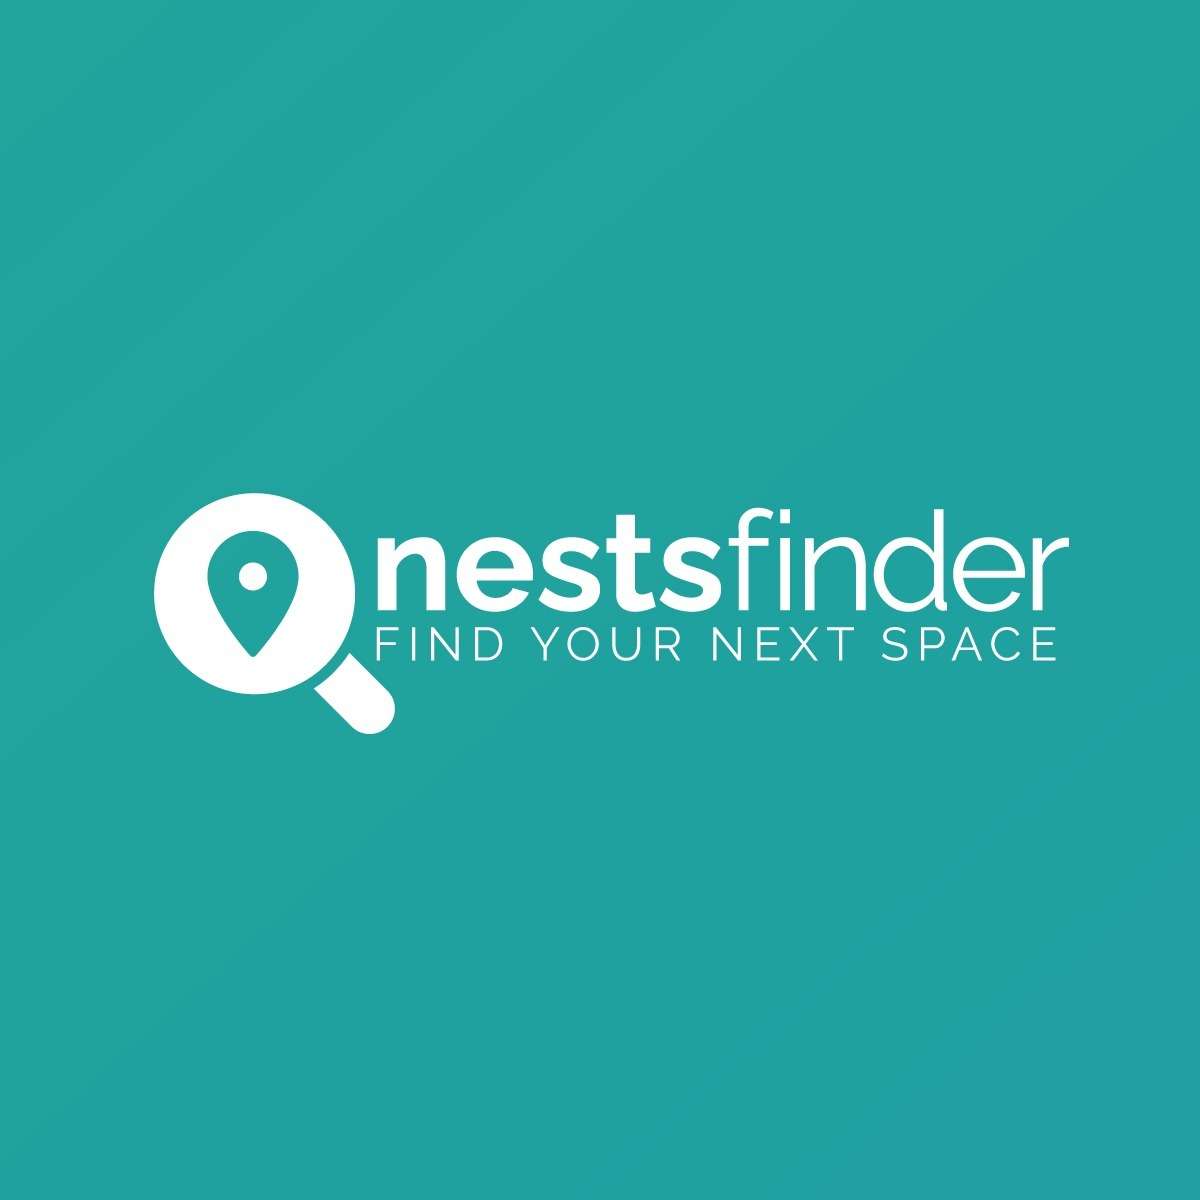 Nests finder Profile Picture